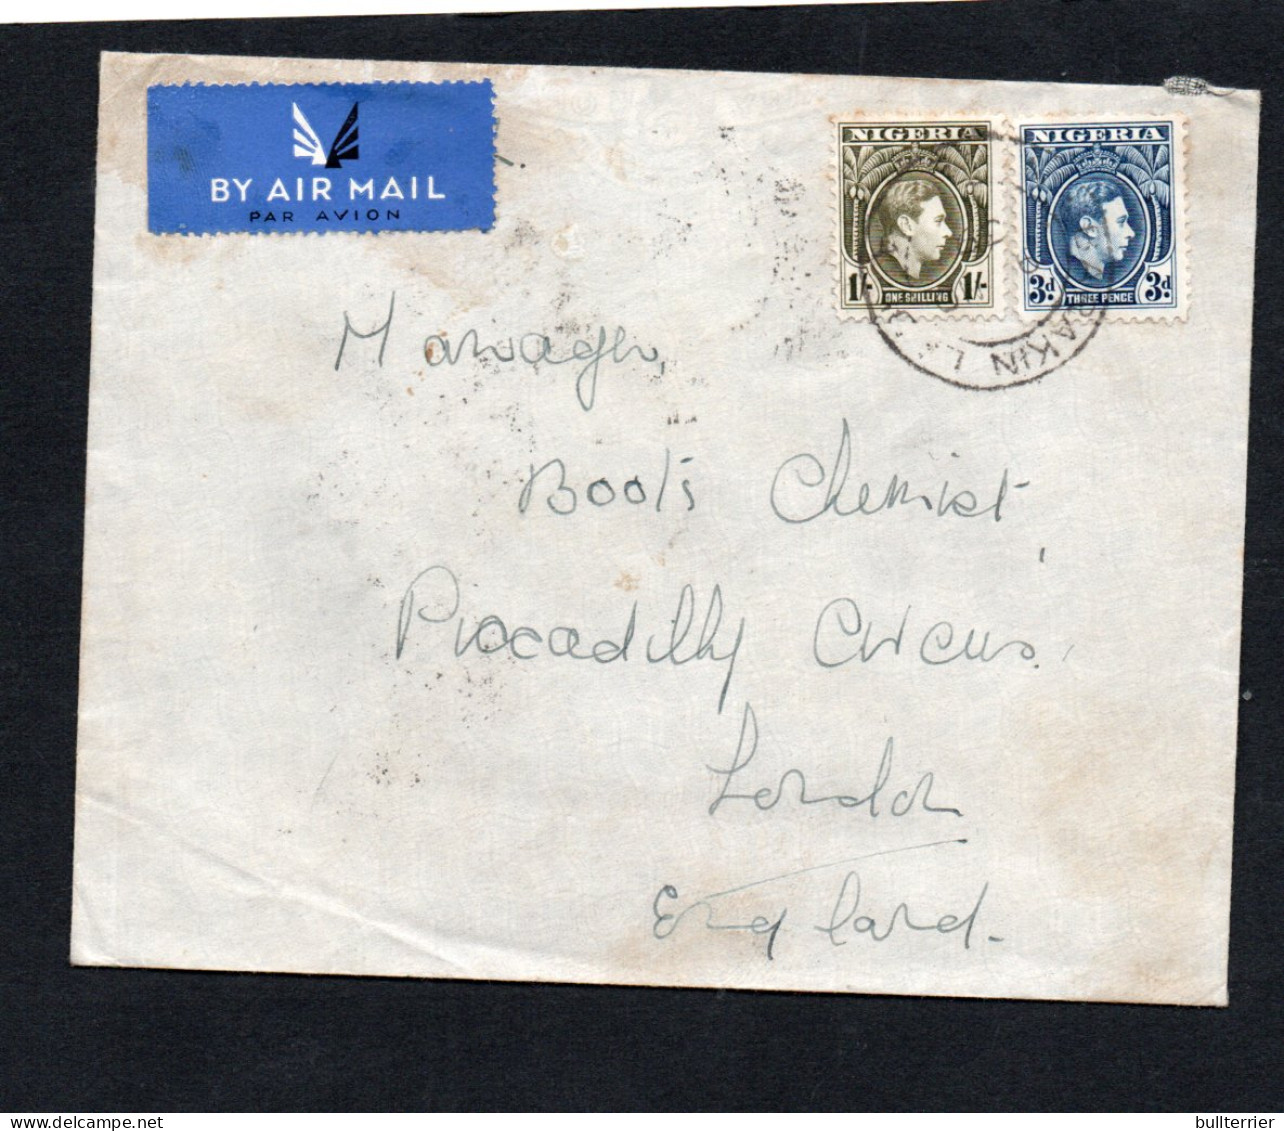 NIGERIA - 1939 - AIRMAIL KANO TO LONDON  WITH BACKSTAMPS - Nigeria (...-1960)